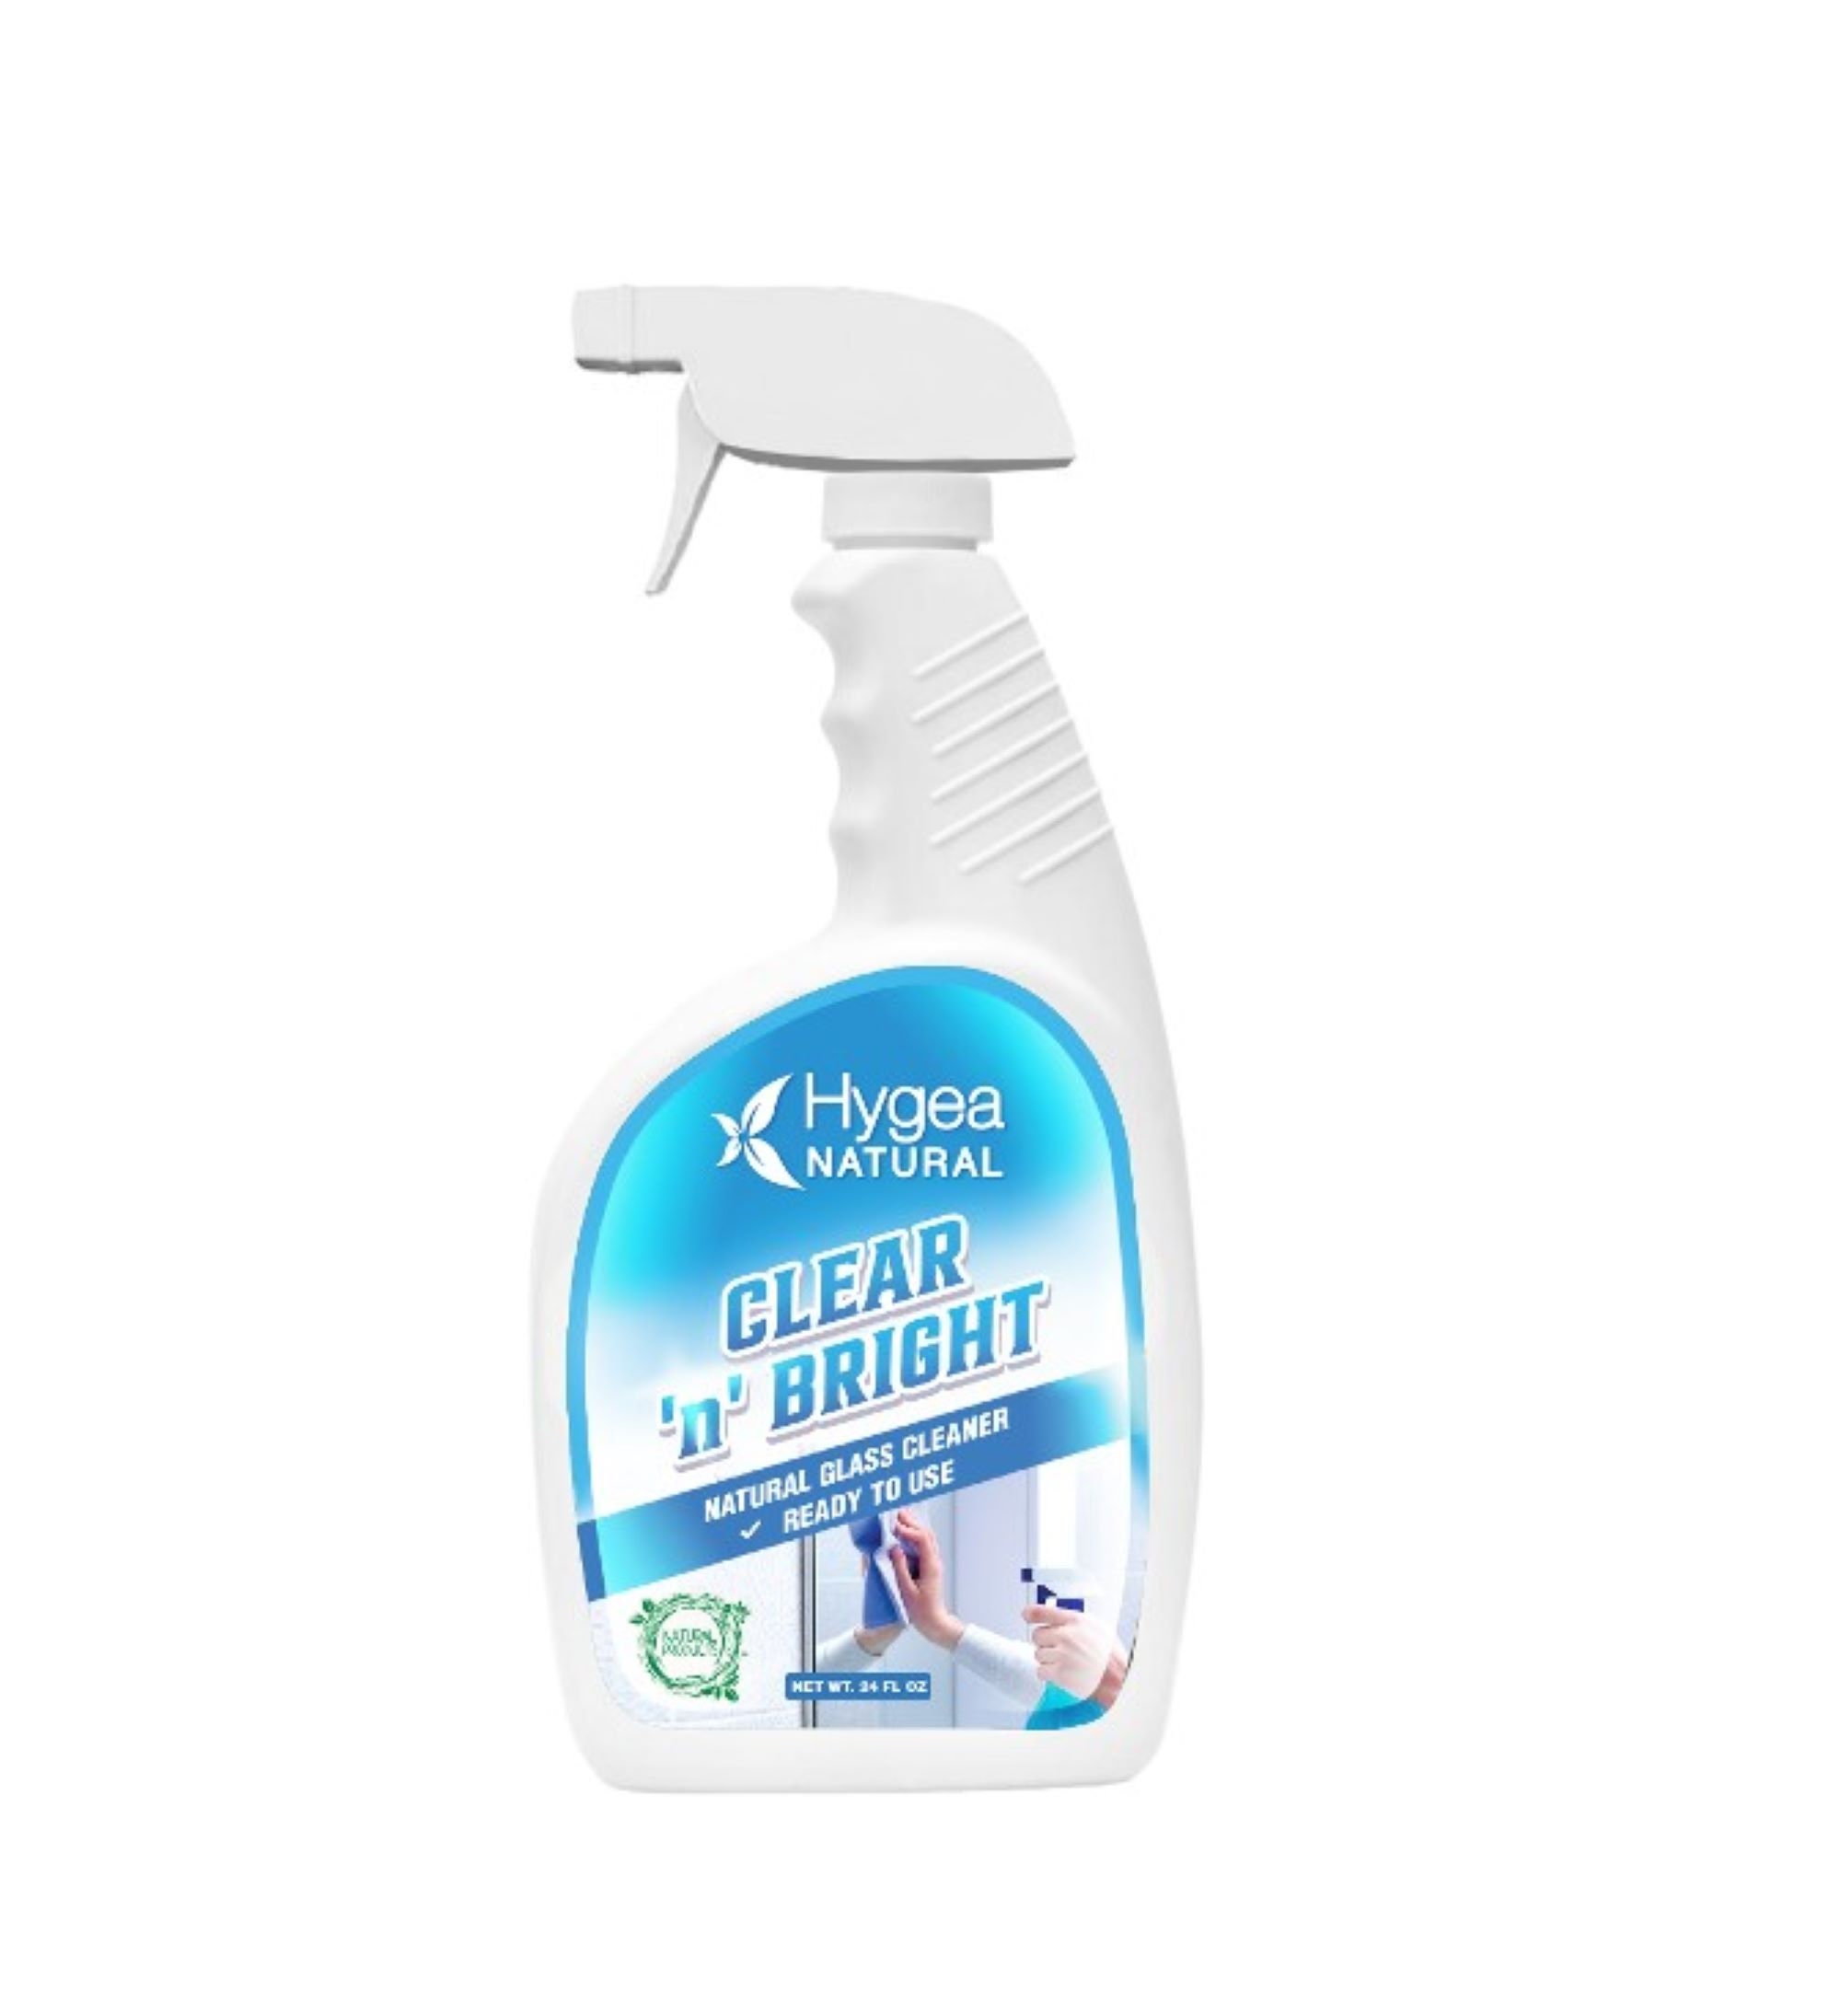 Clear 'n' Bright Natural Glass Cleaner Ready to Use Gallon